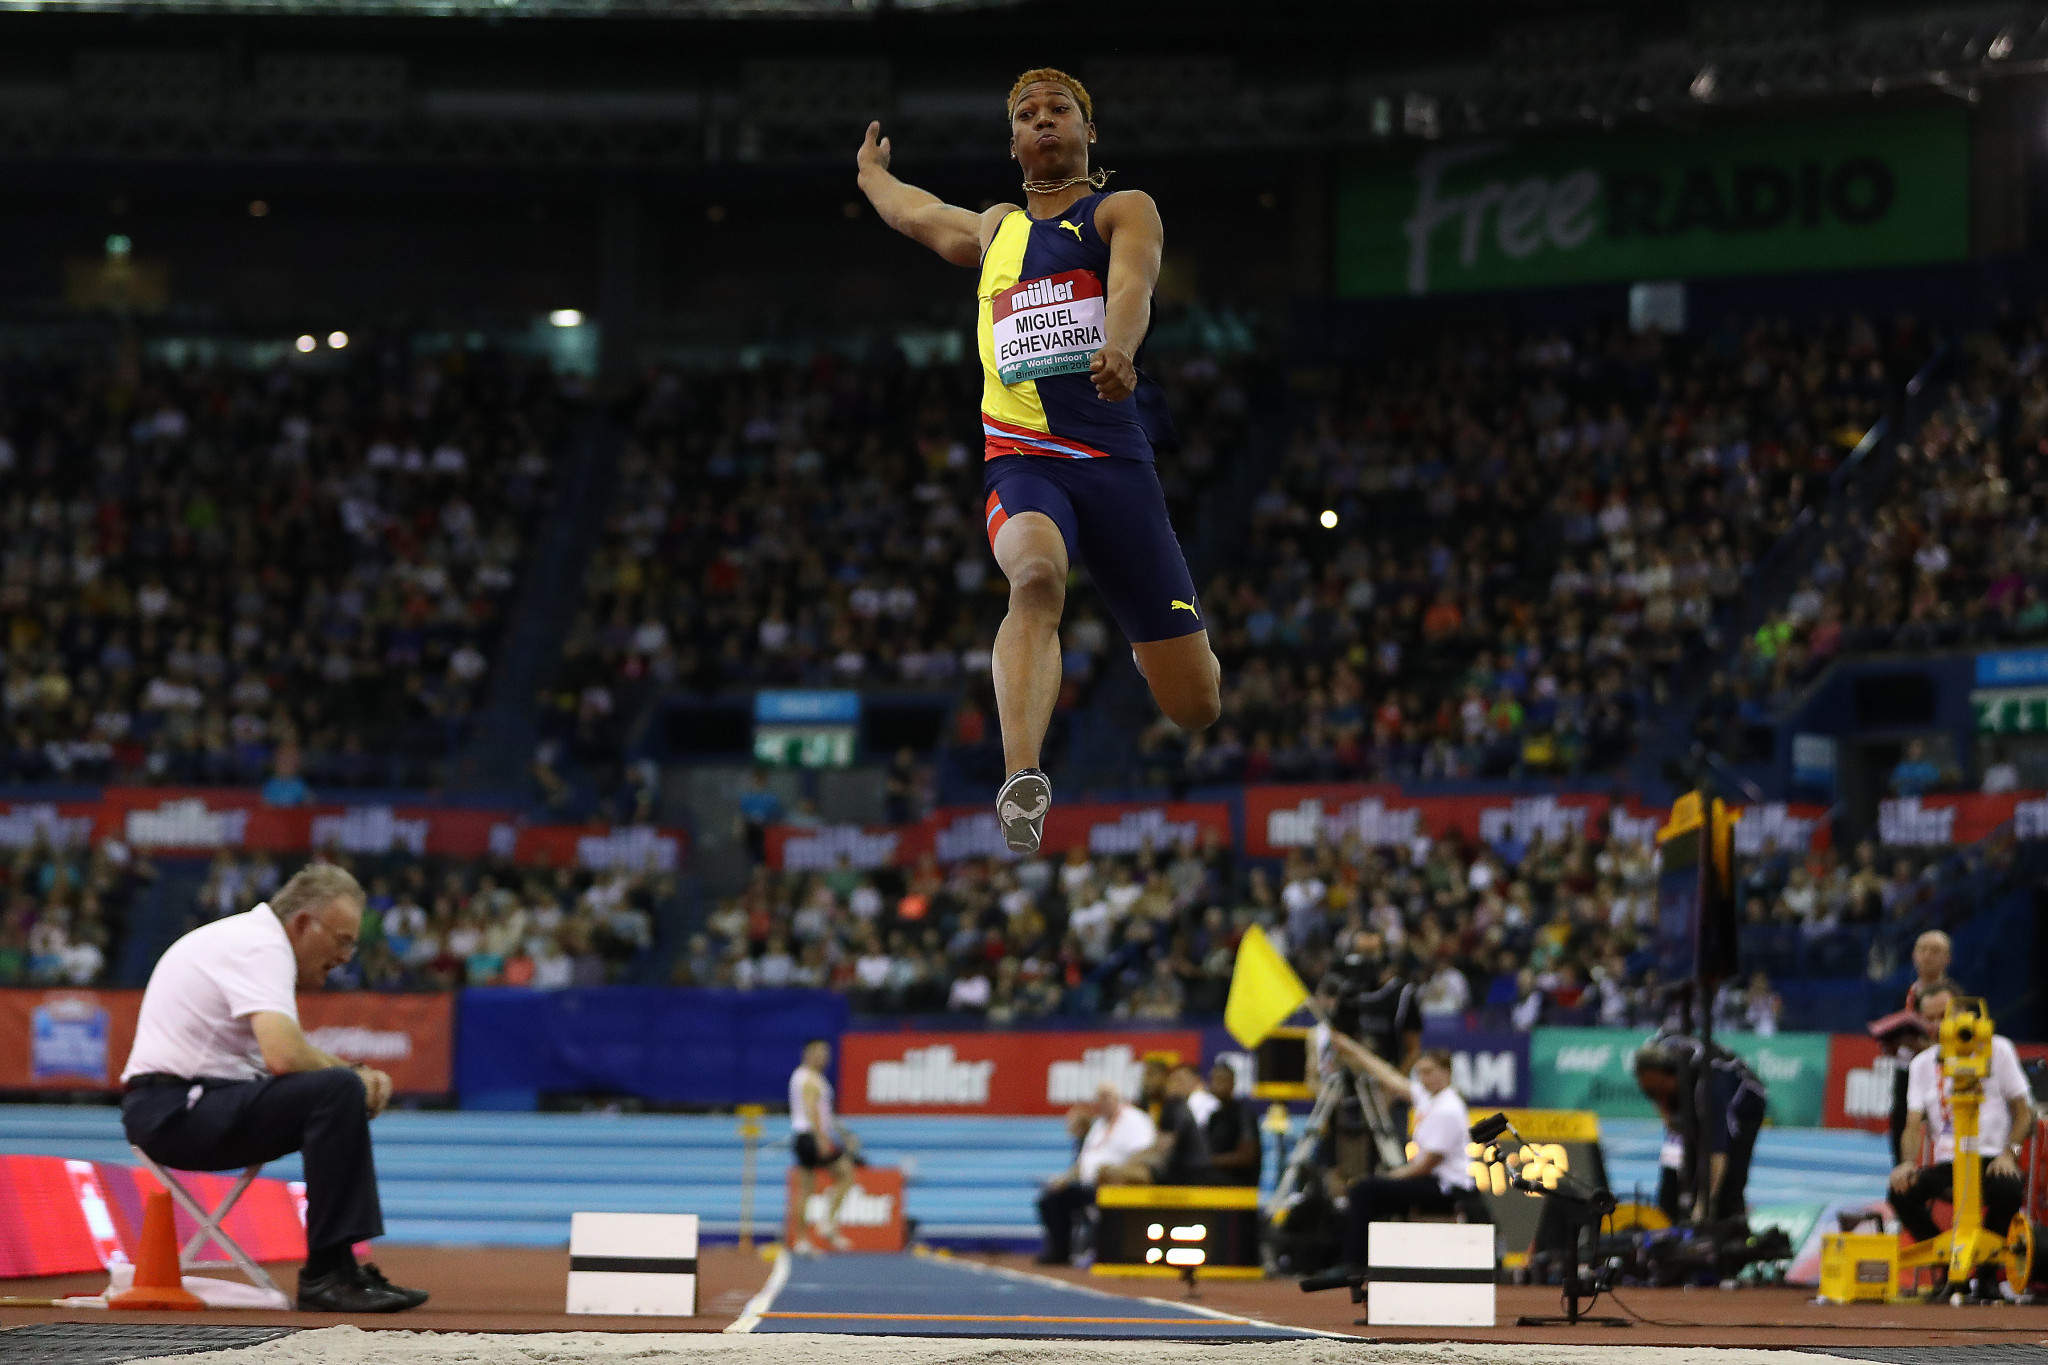 Prize money and wildcards on offer on 2020 World Athletics Indoor Tour